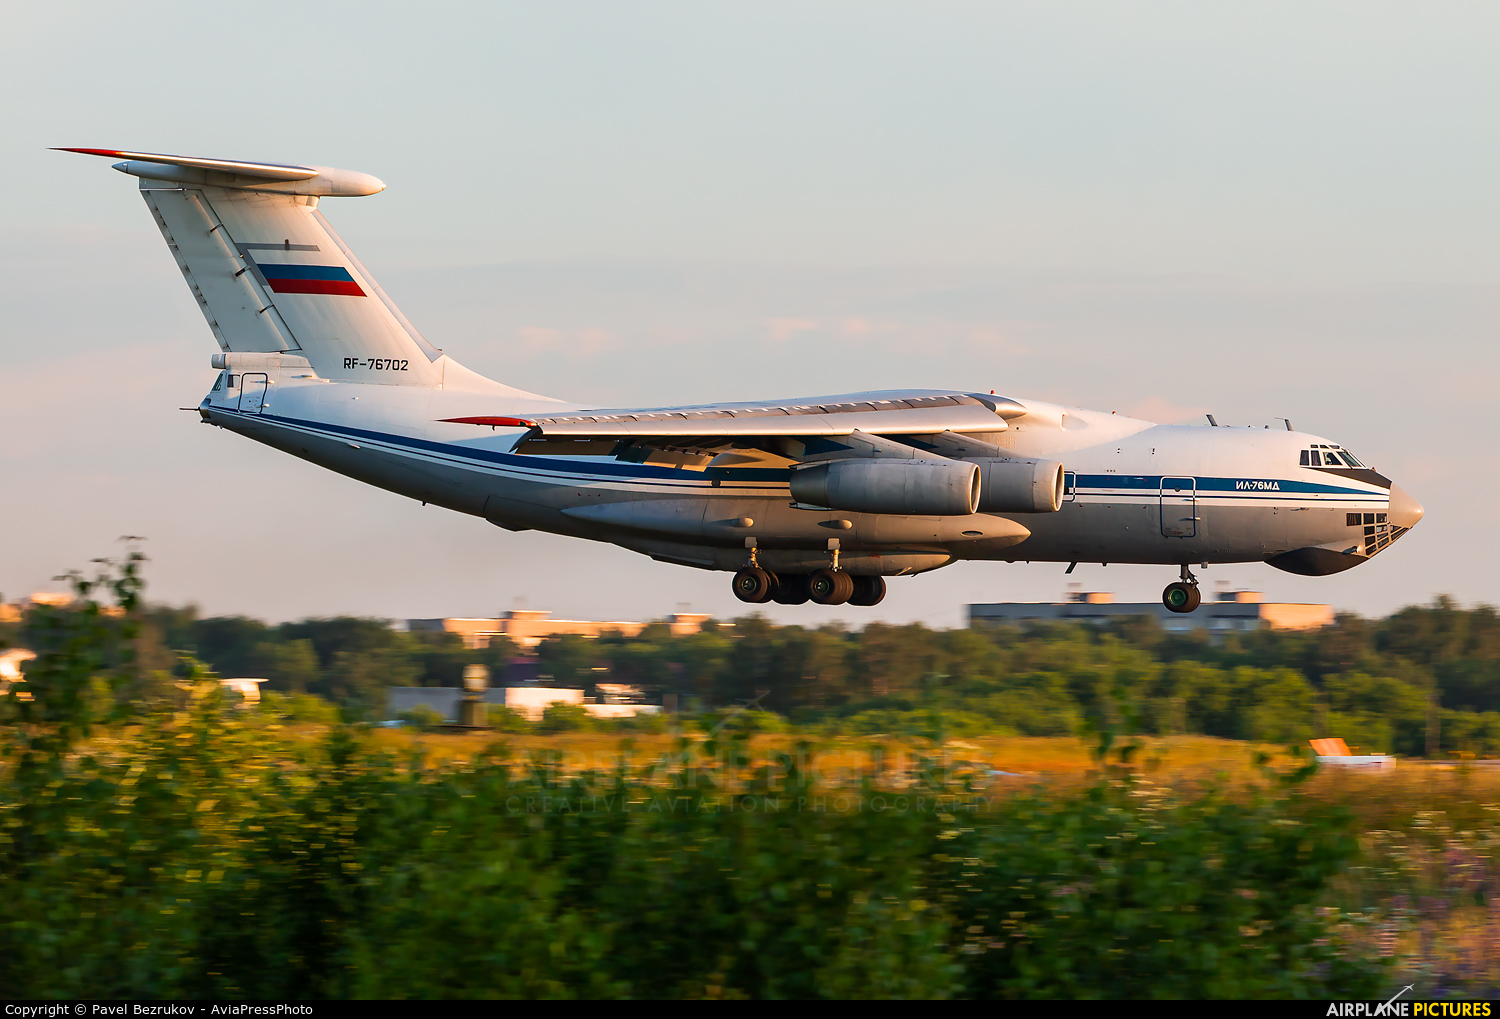 Russia - Air Force RF-76702 aircraft at Undisclosed Location